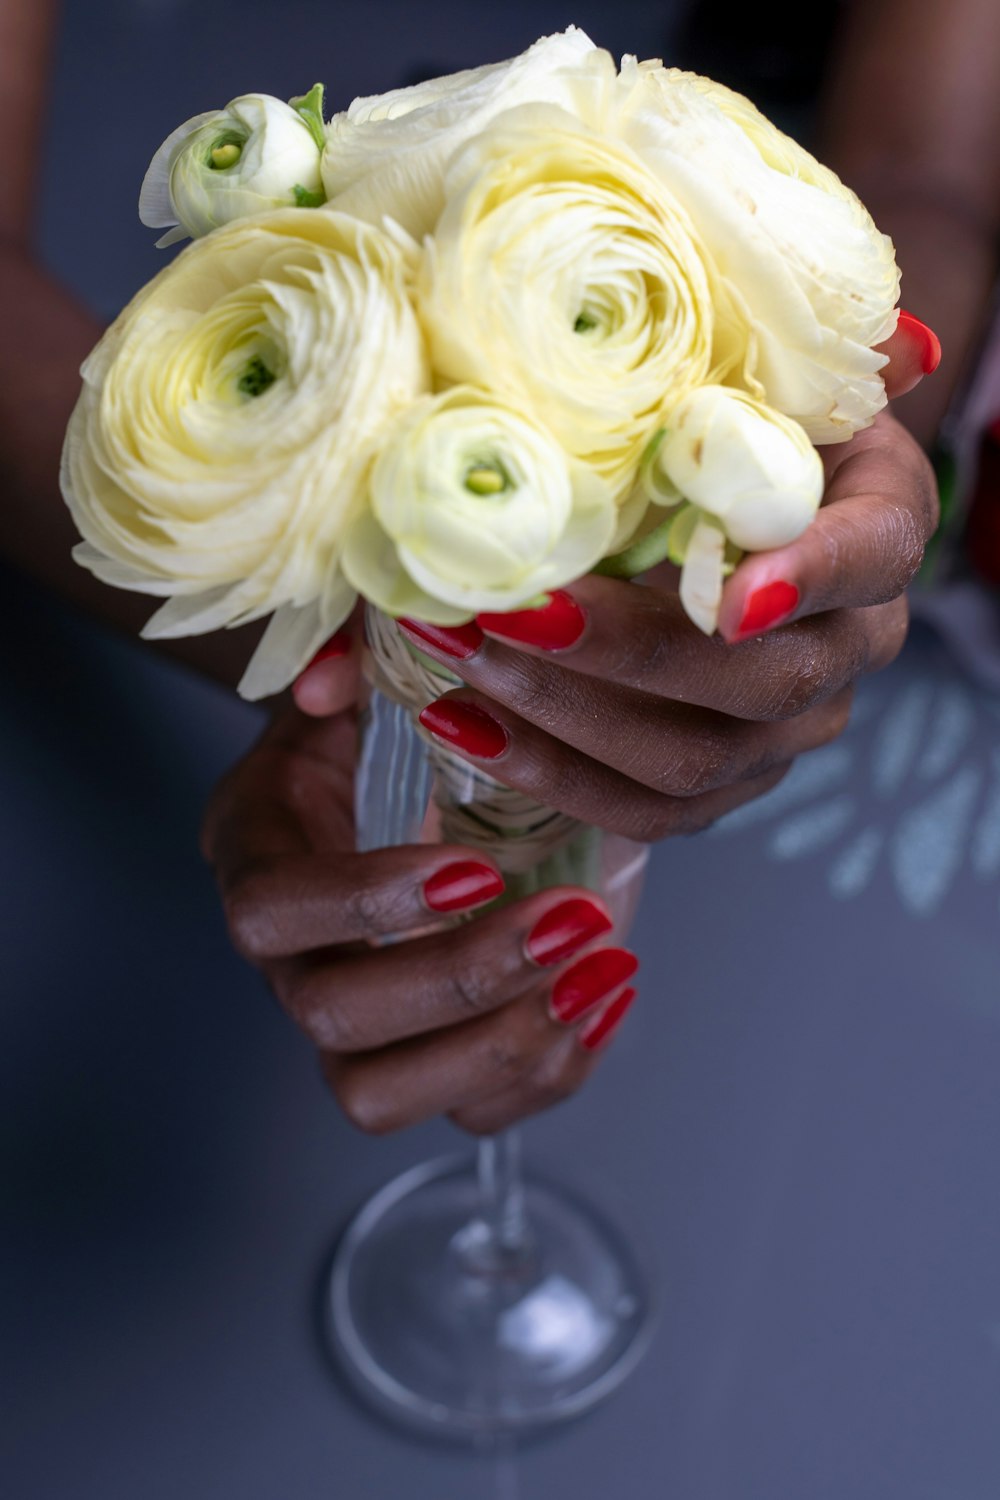 person holding white rose in close up photography